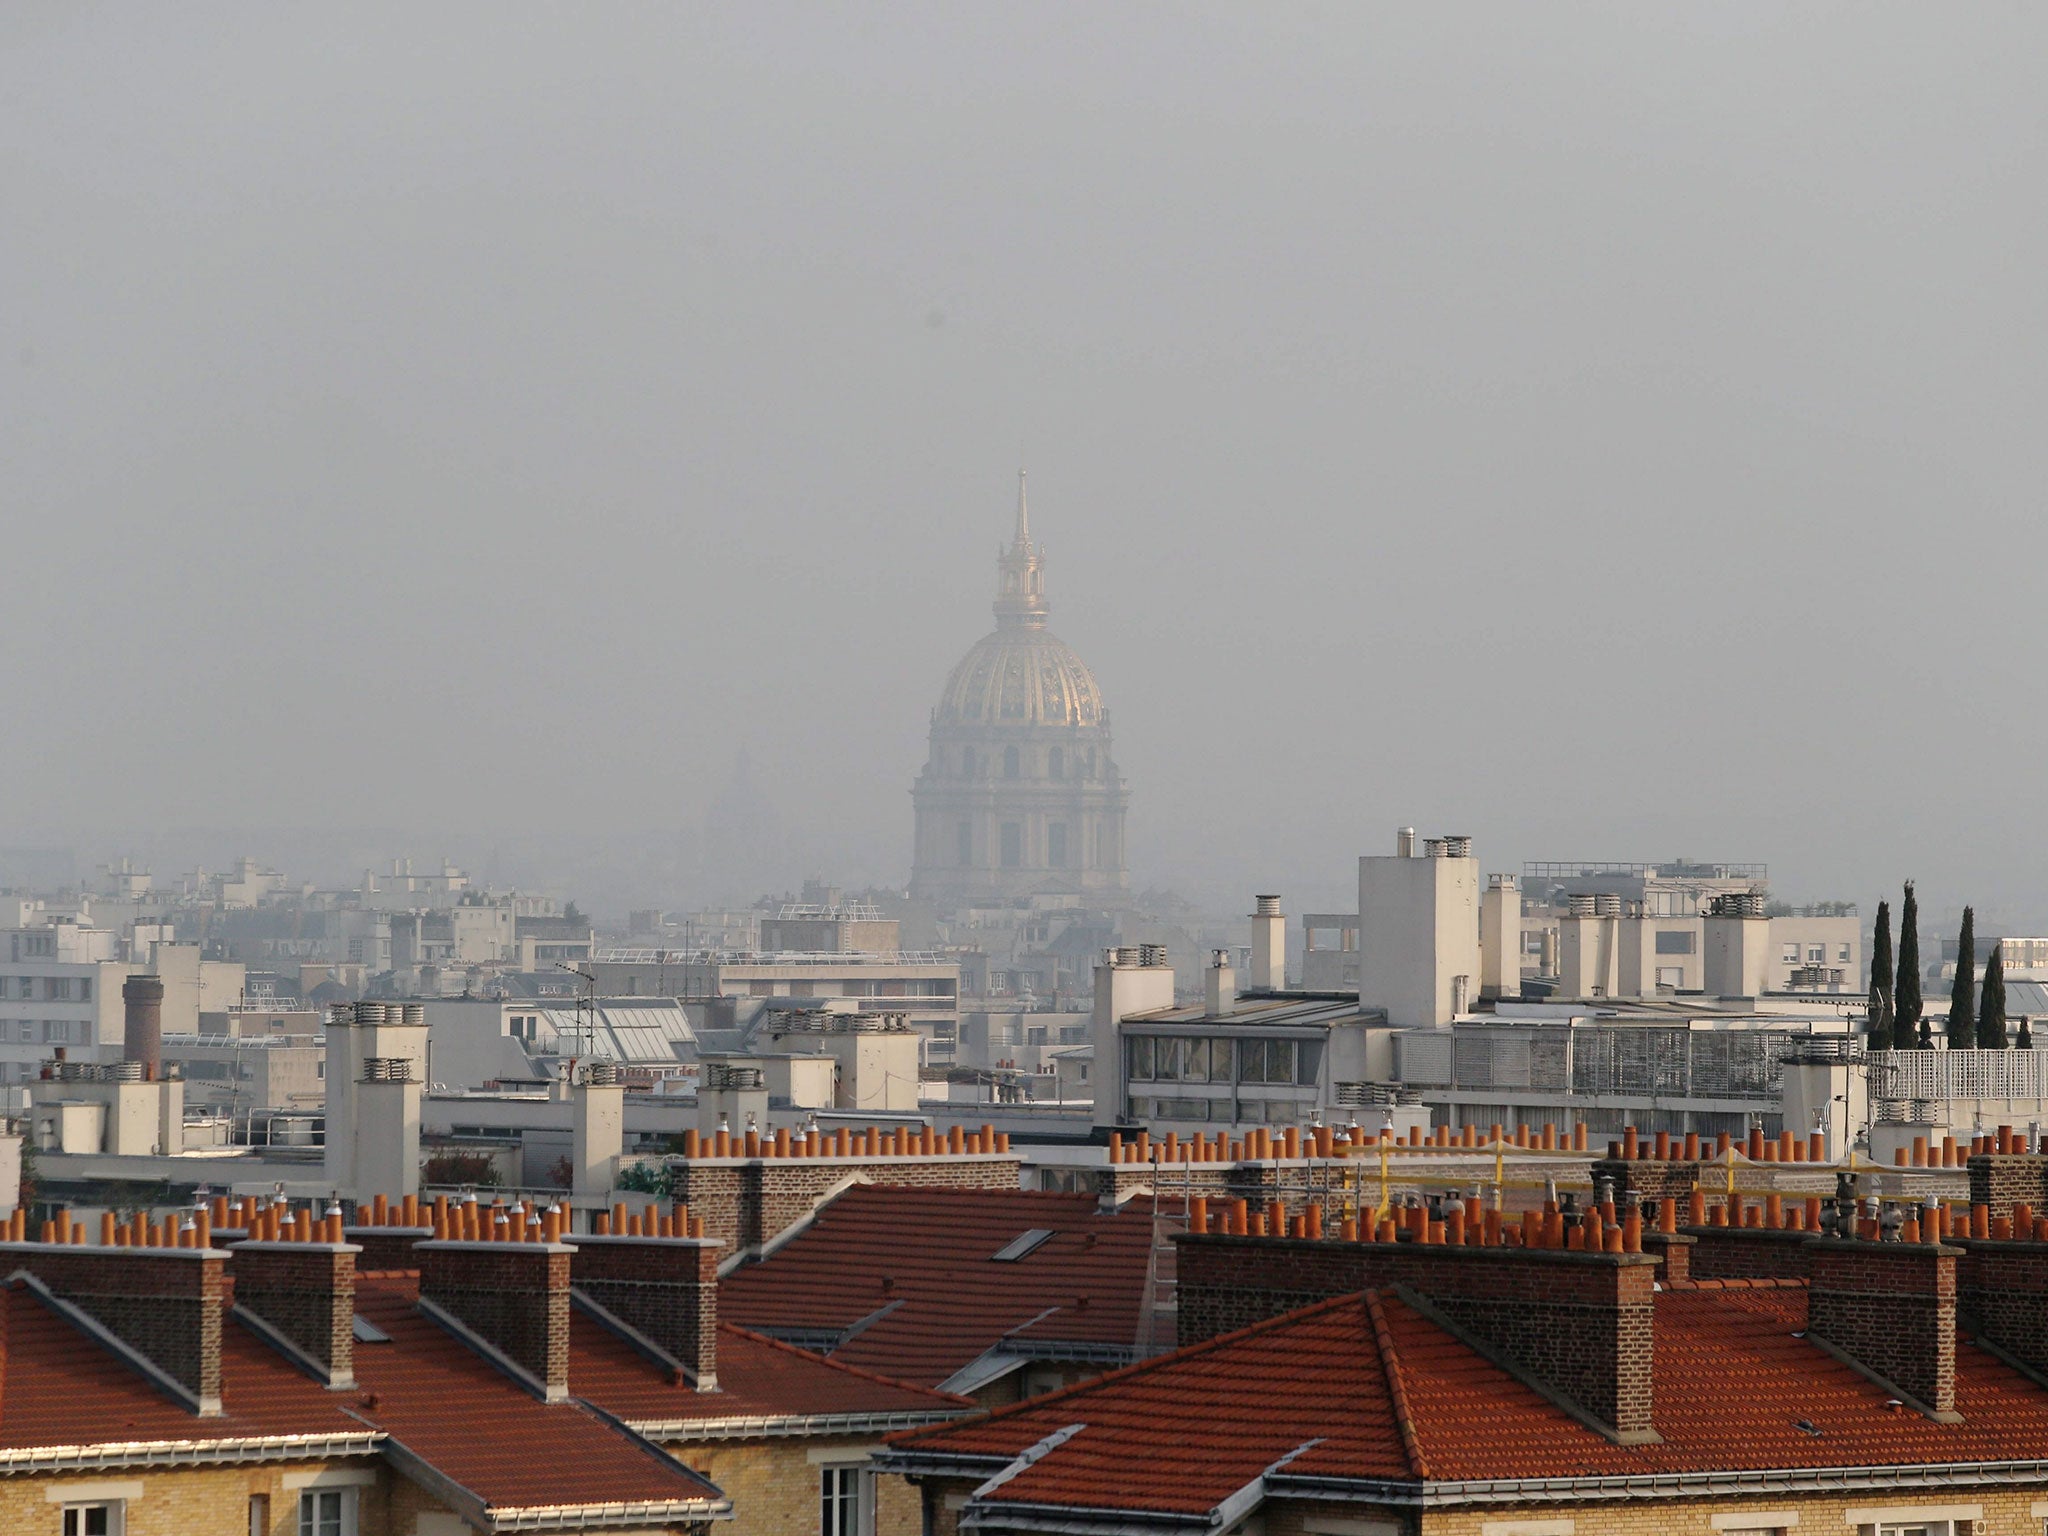 Wealthy countries have less of an air pollution problems than poorer ones, but even cities like Paris, above, have levels well above the recommended limits